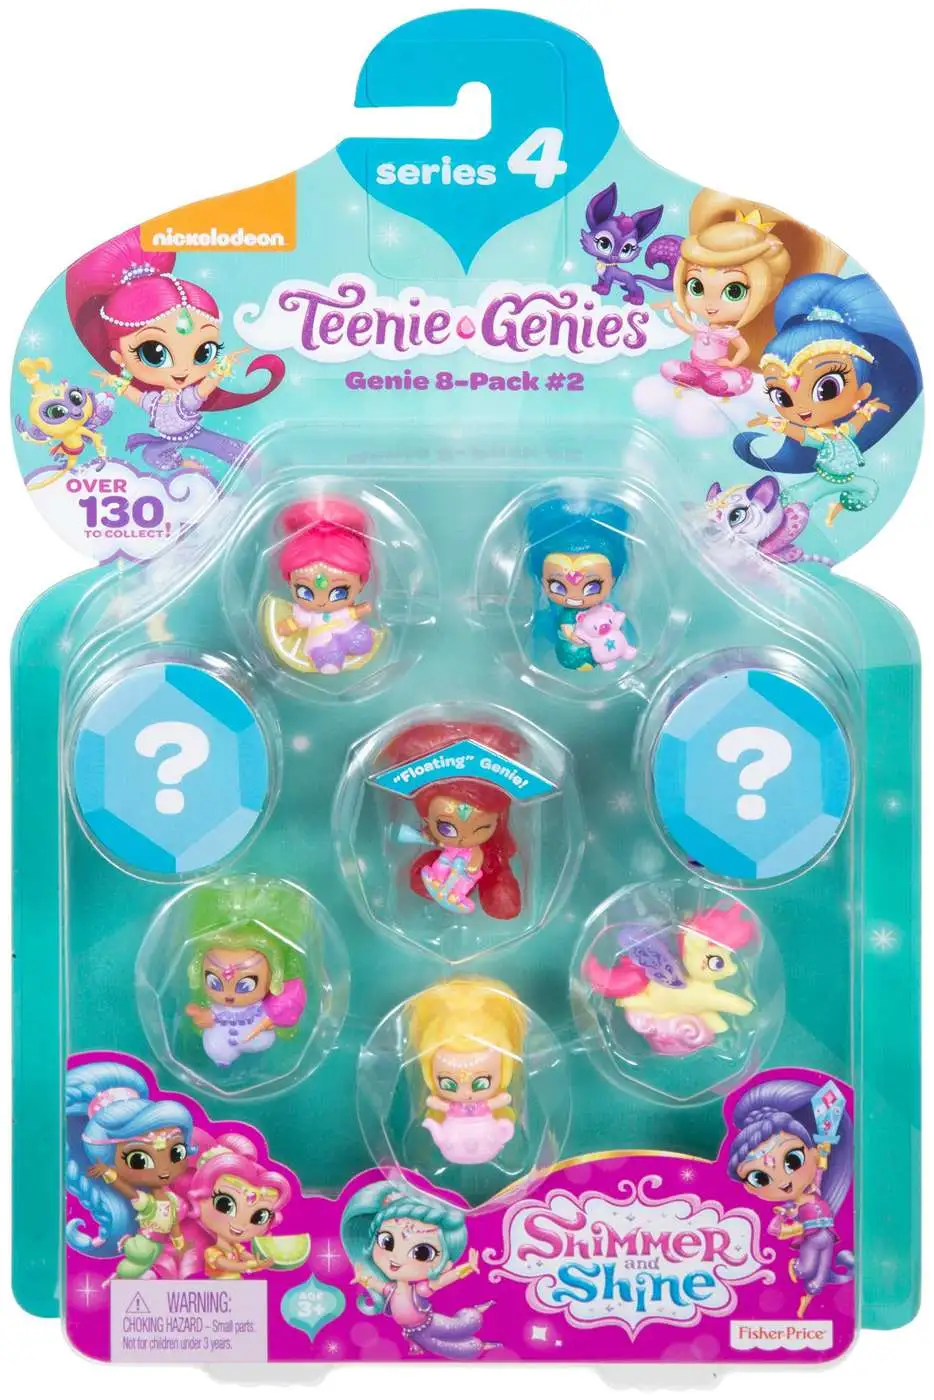 New Teenie Genies Series 4 #11 Collectables Shimmer and Shine Nickelodeon 8 Pack 